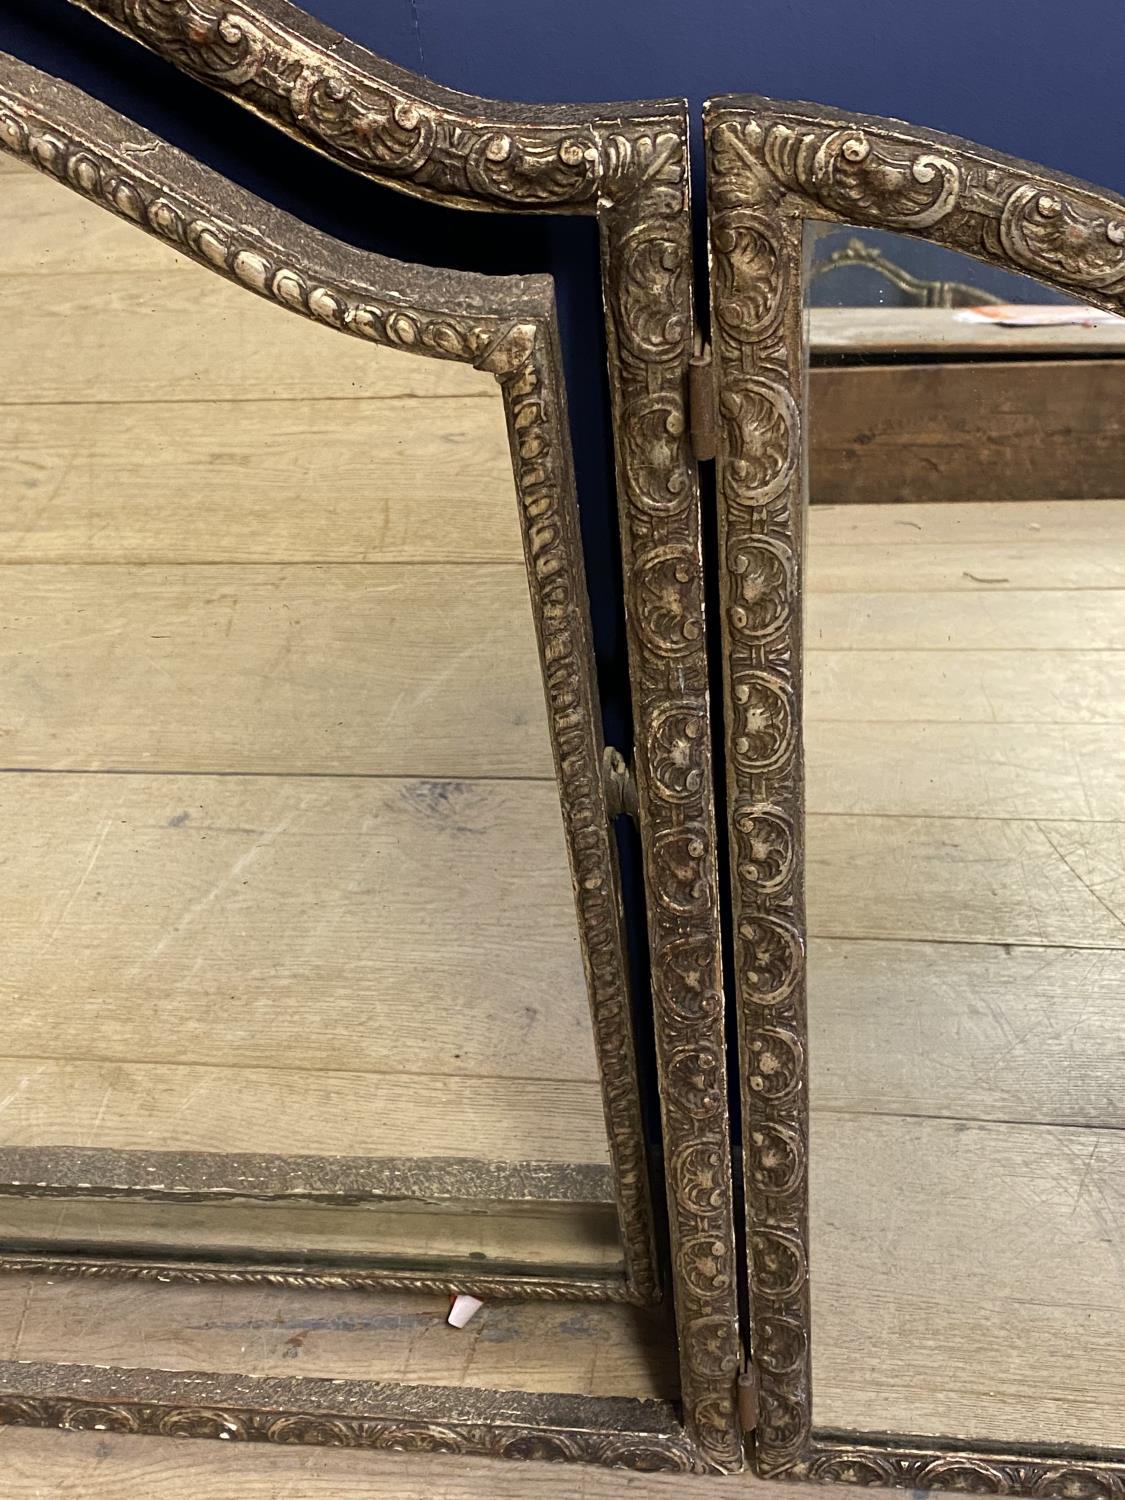 3 panelled dressing table mirror, 79 x 115cm overall (condition - needs restoration) - Image 3 of 4